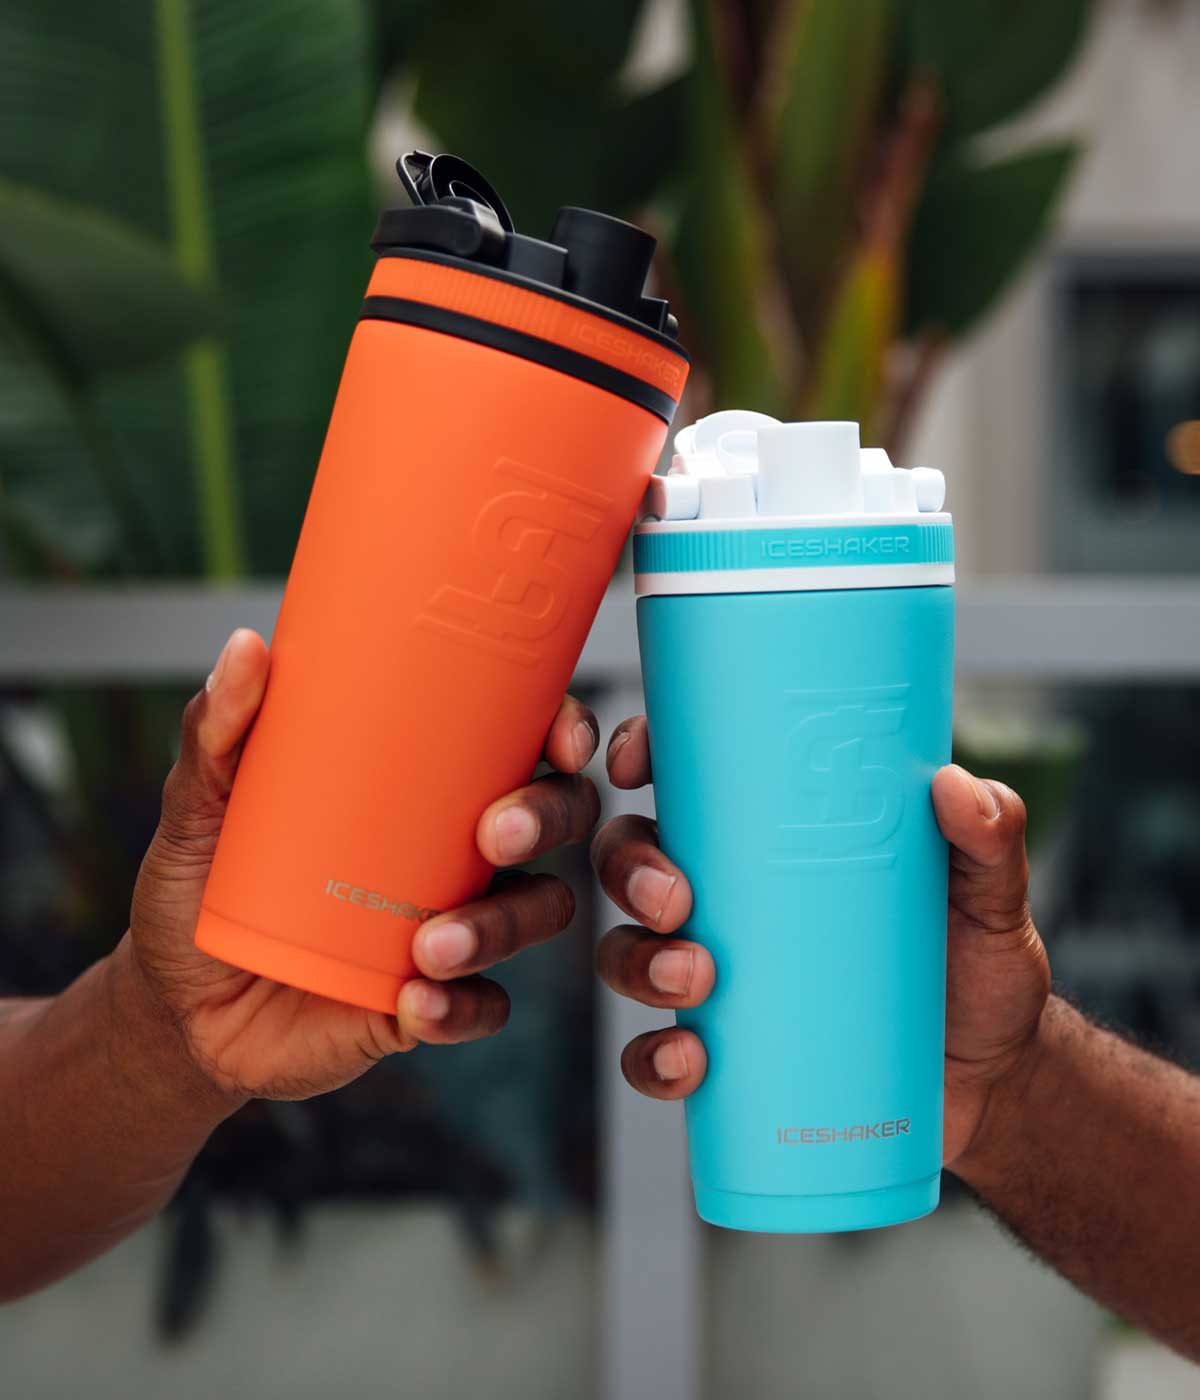 An Orange 26oz Ice Shaker and a Caribbean Blue 26oz Ice Shaker are being held together by two hands. This image shows a close up front view of the 26oz Ice Shakers